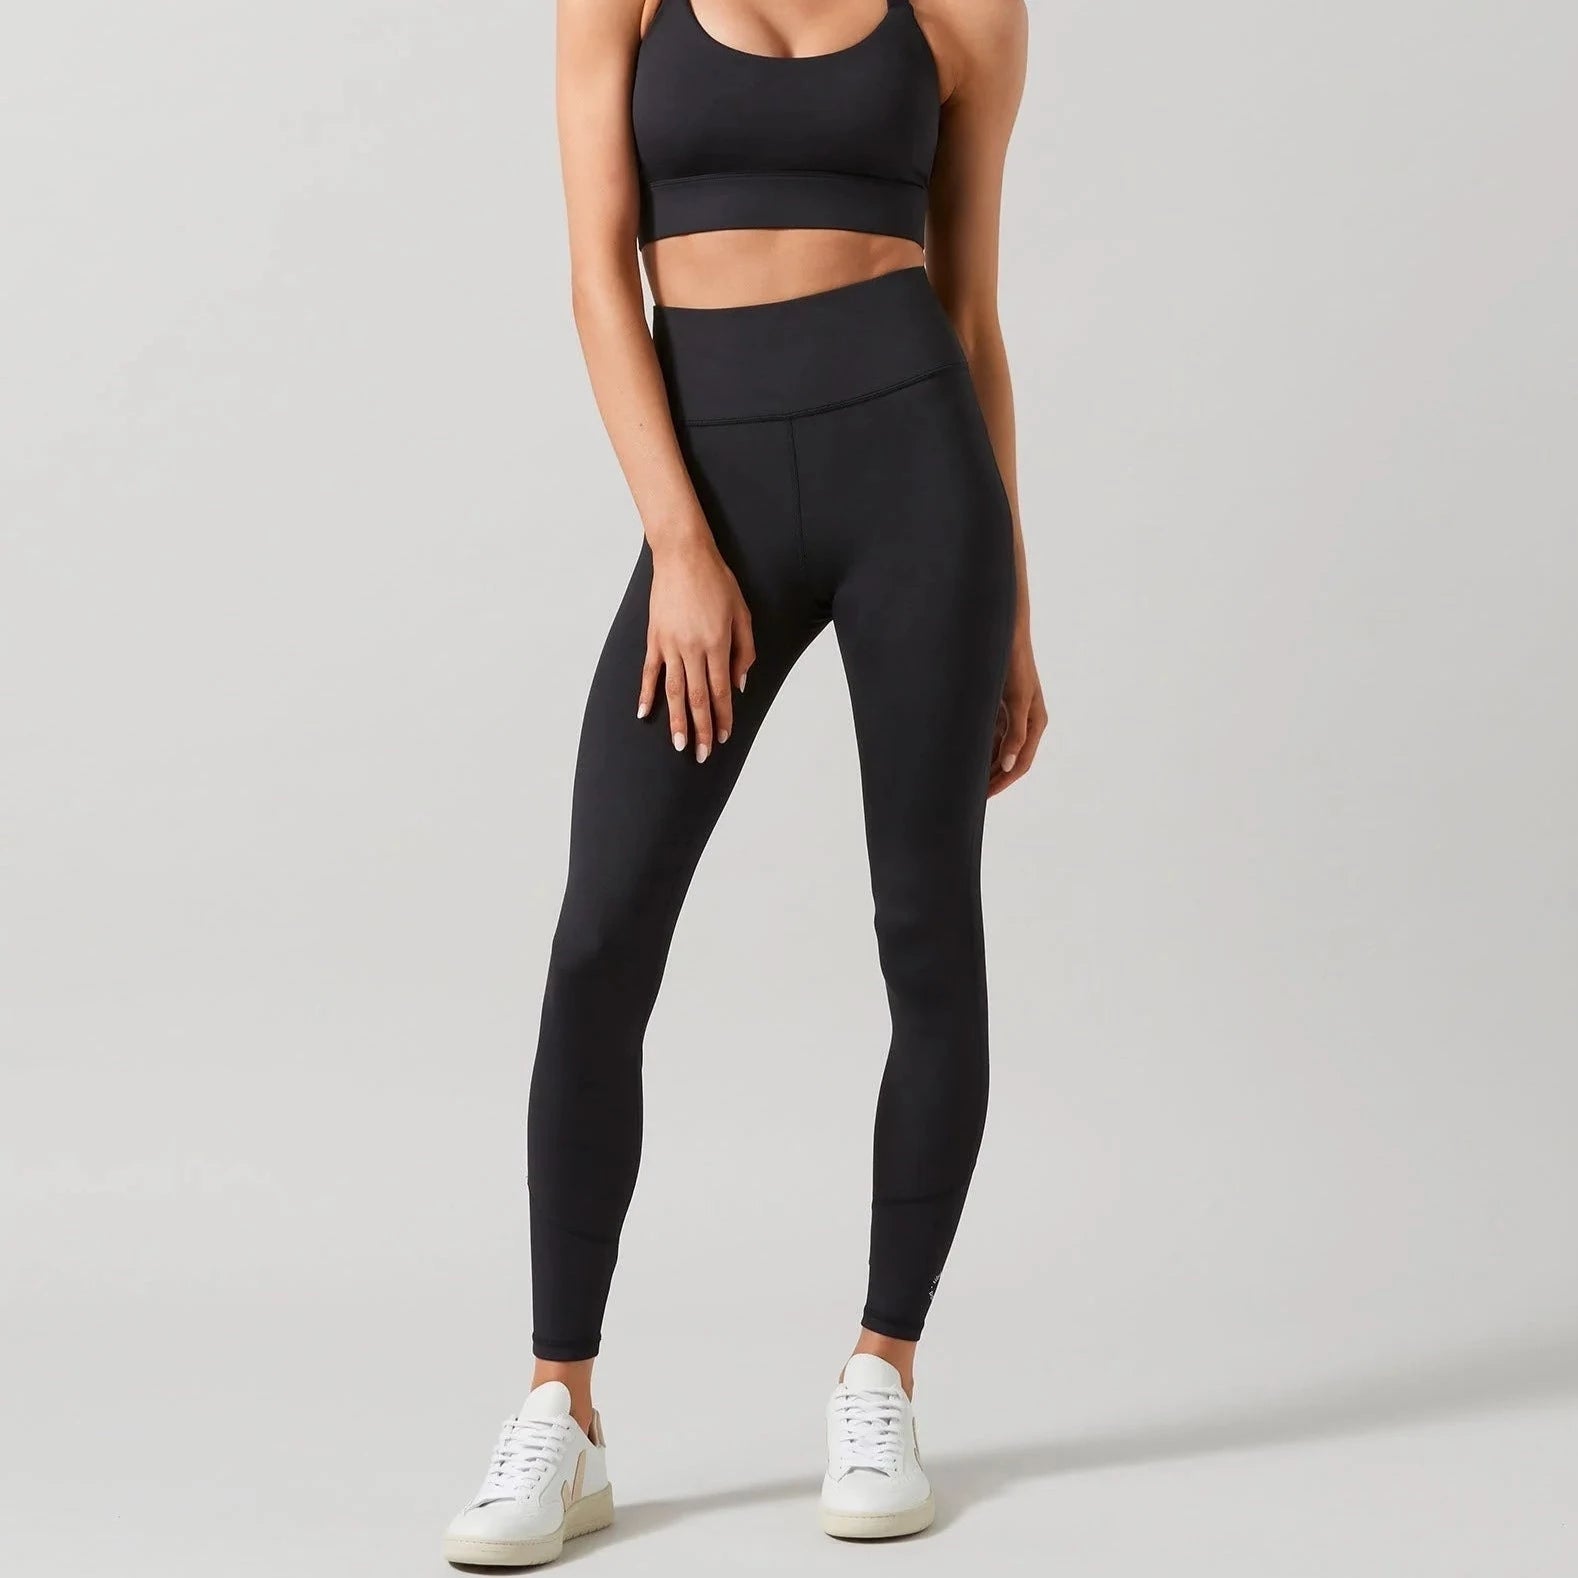 Lilybod activewear for yoga and fitness for women - Soccer Sport